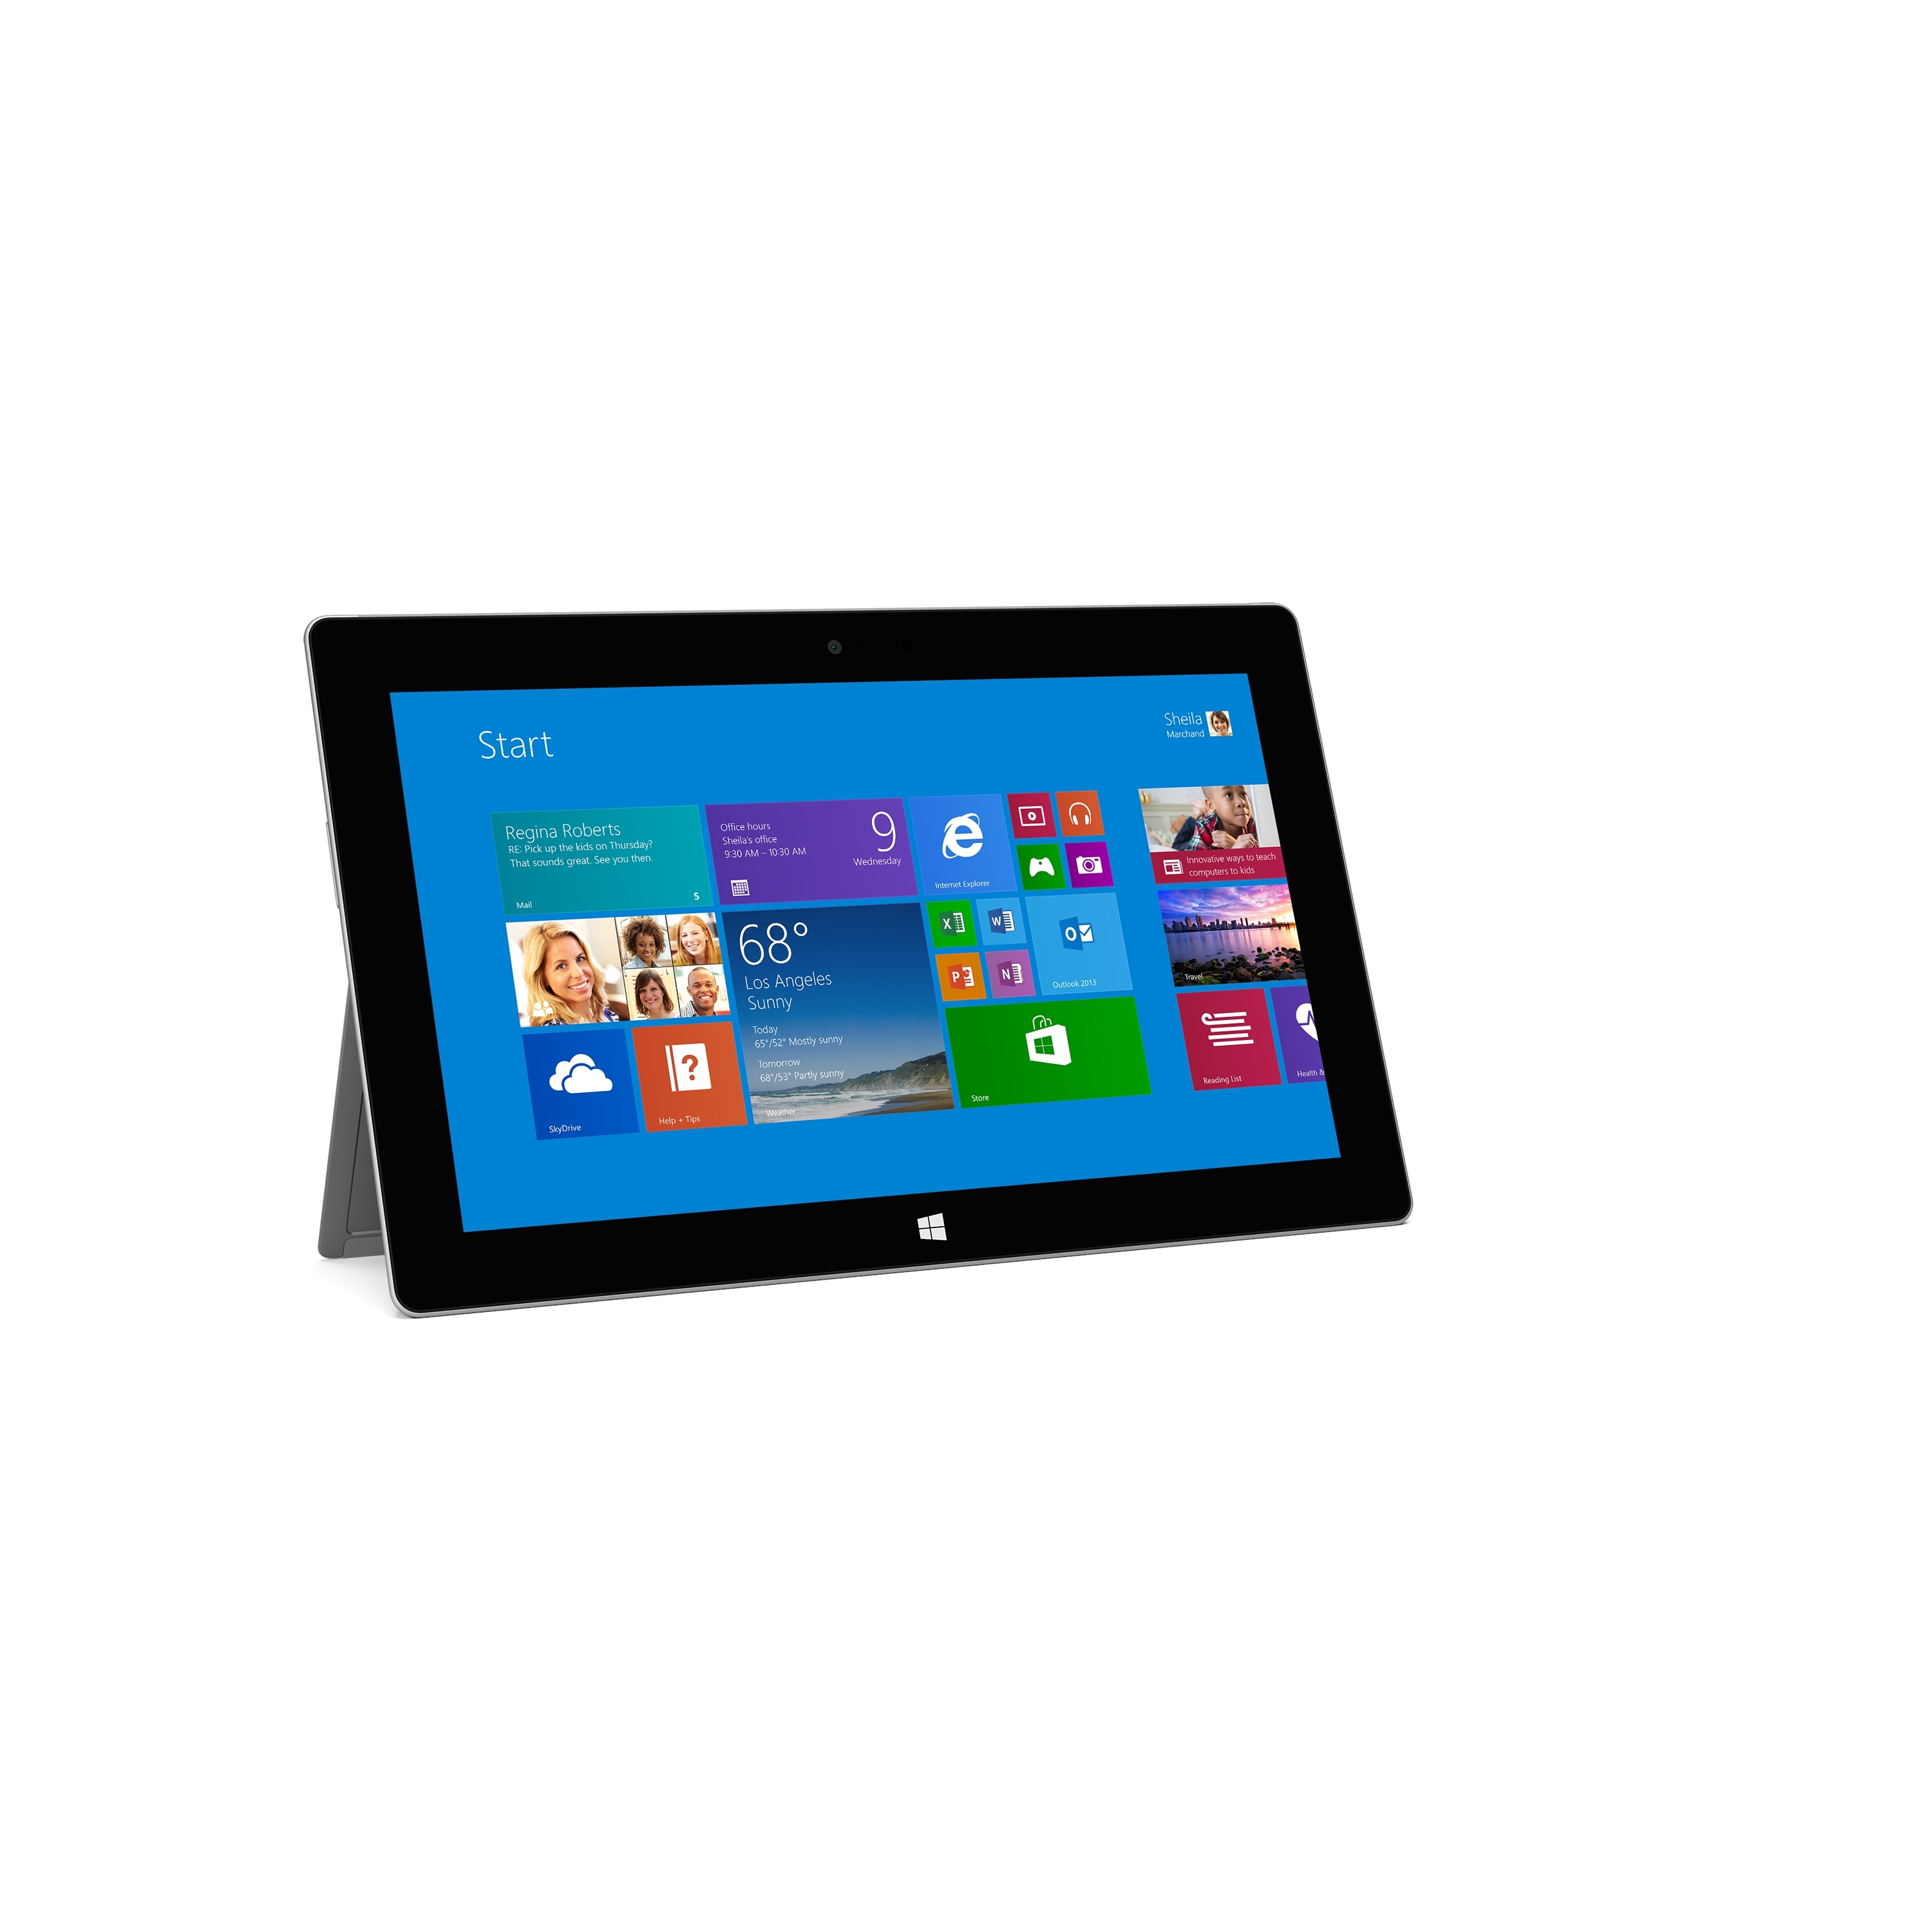 bronze And team salami P4W00001_R Refurbished Microsoft Surface 2 RT 64GB Tablet NVIDIA Tegra 4 X4  1.7GHz 10.6",Black (Certified Refurbished)